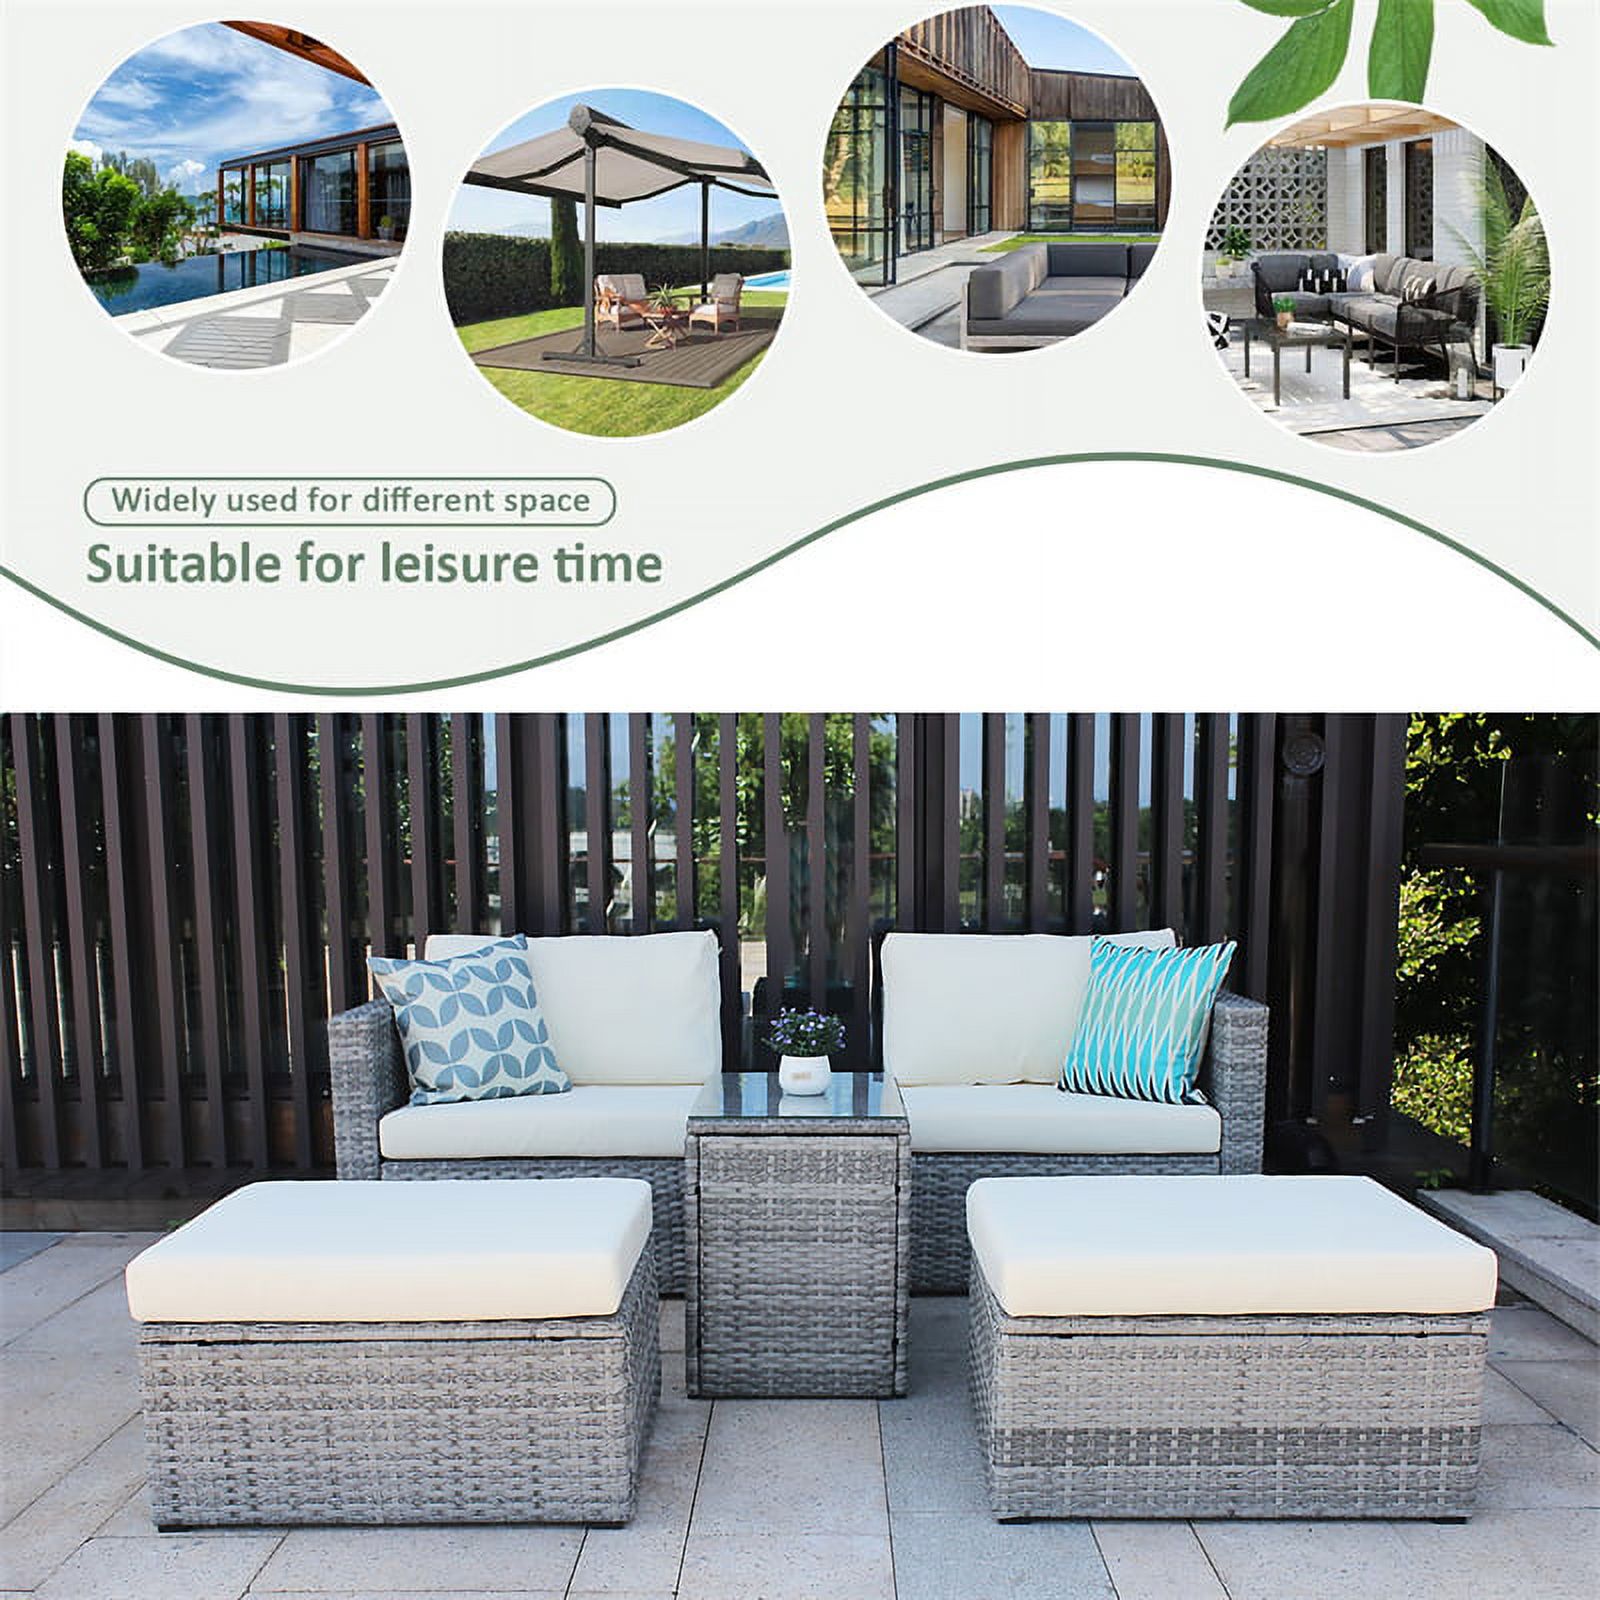 5 Pieces Outdoor Patio Sectional Sofa Set, Gray Rattan and Beige Cushion with Weather Protecting Cover, Patio Sofa Sets with 2 Rattan Chairs, 2 Pieces Patio Rattan Ottomans and Coffee Table - image 4 of 7